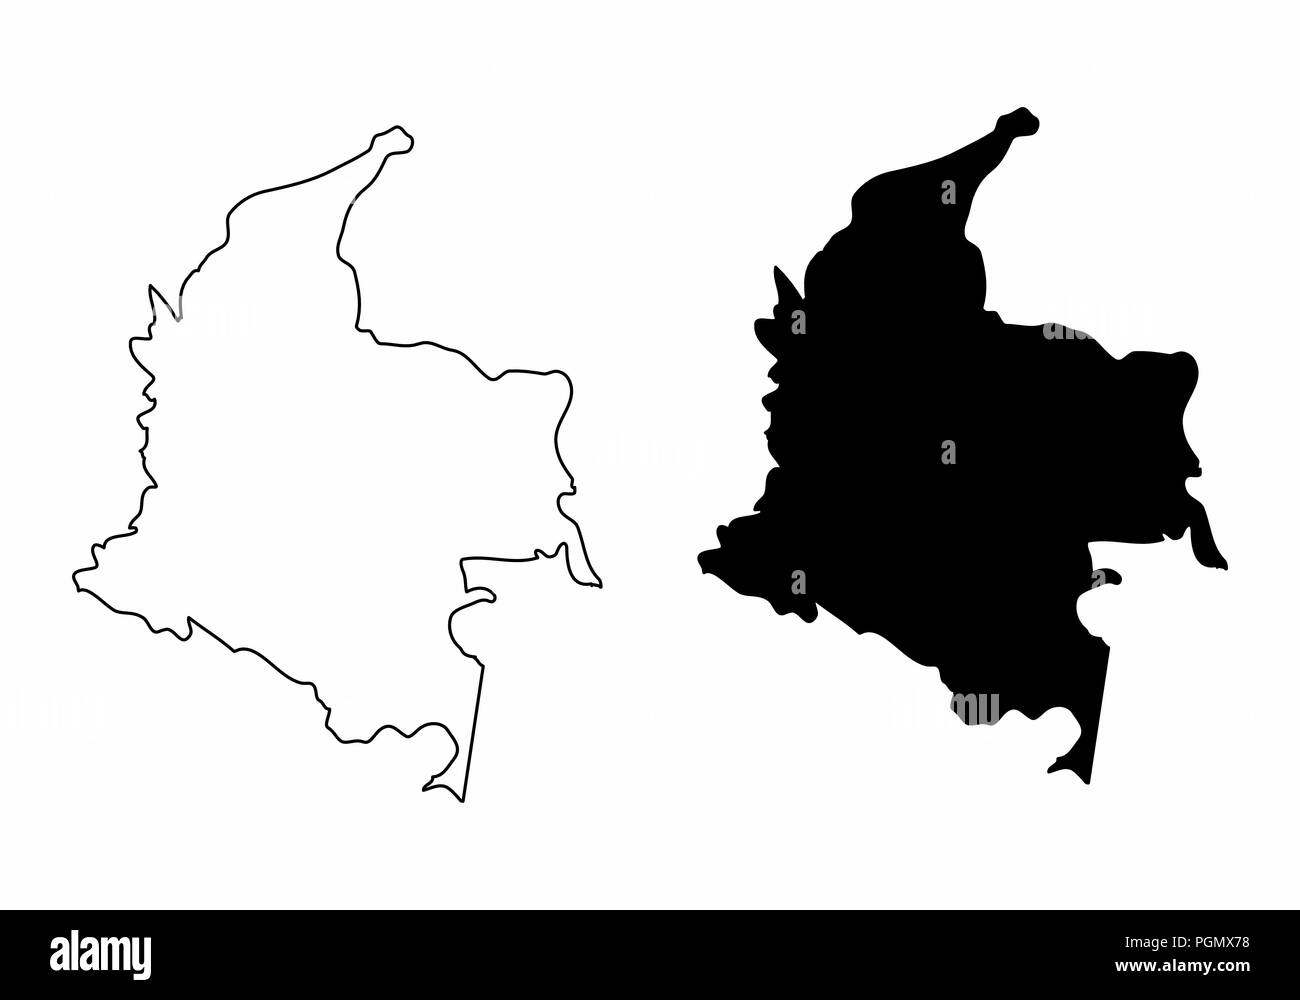 Simplified Maps Of Colombia Black And White Outlines Stock Vector